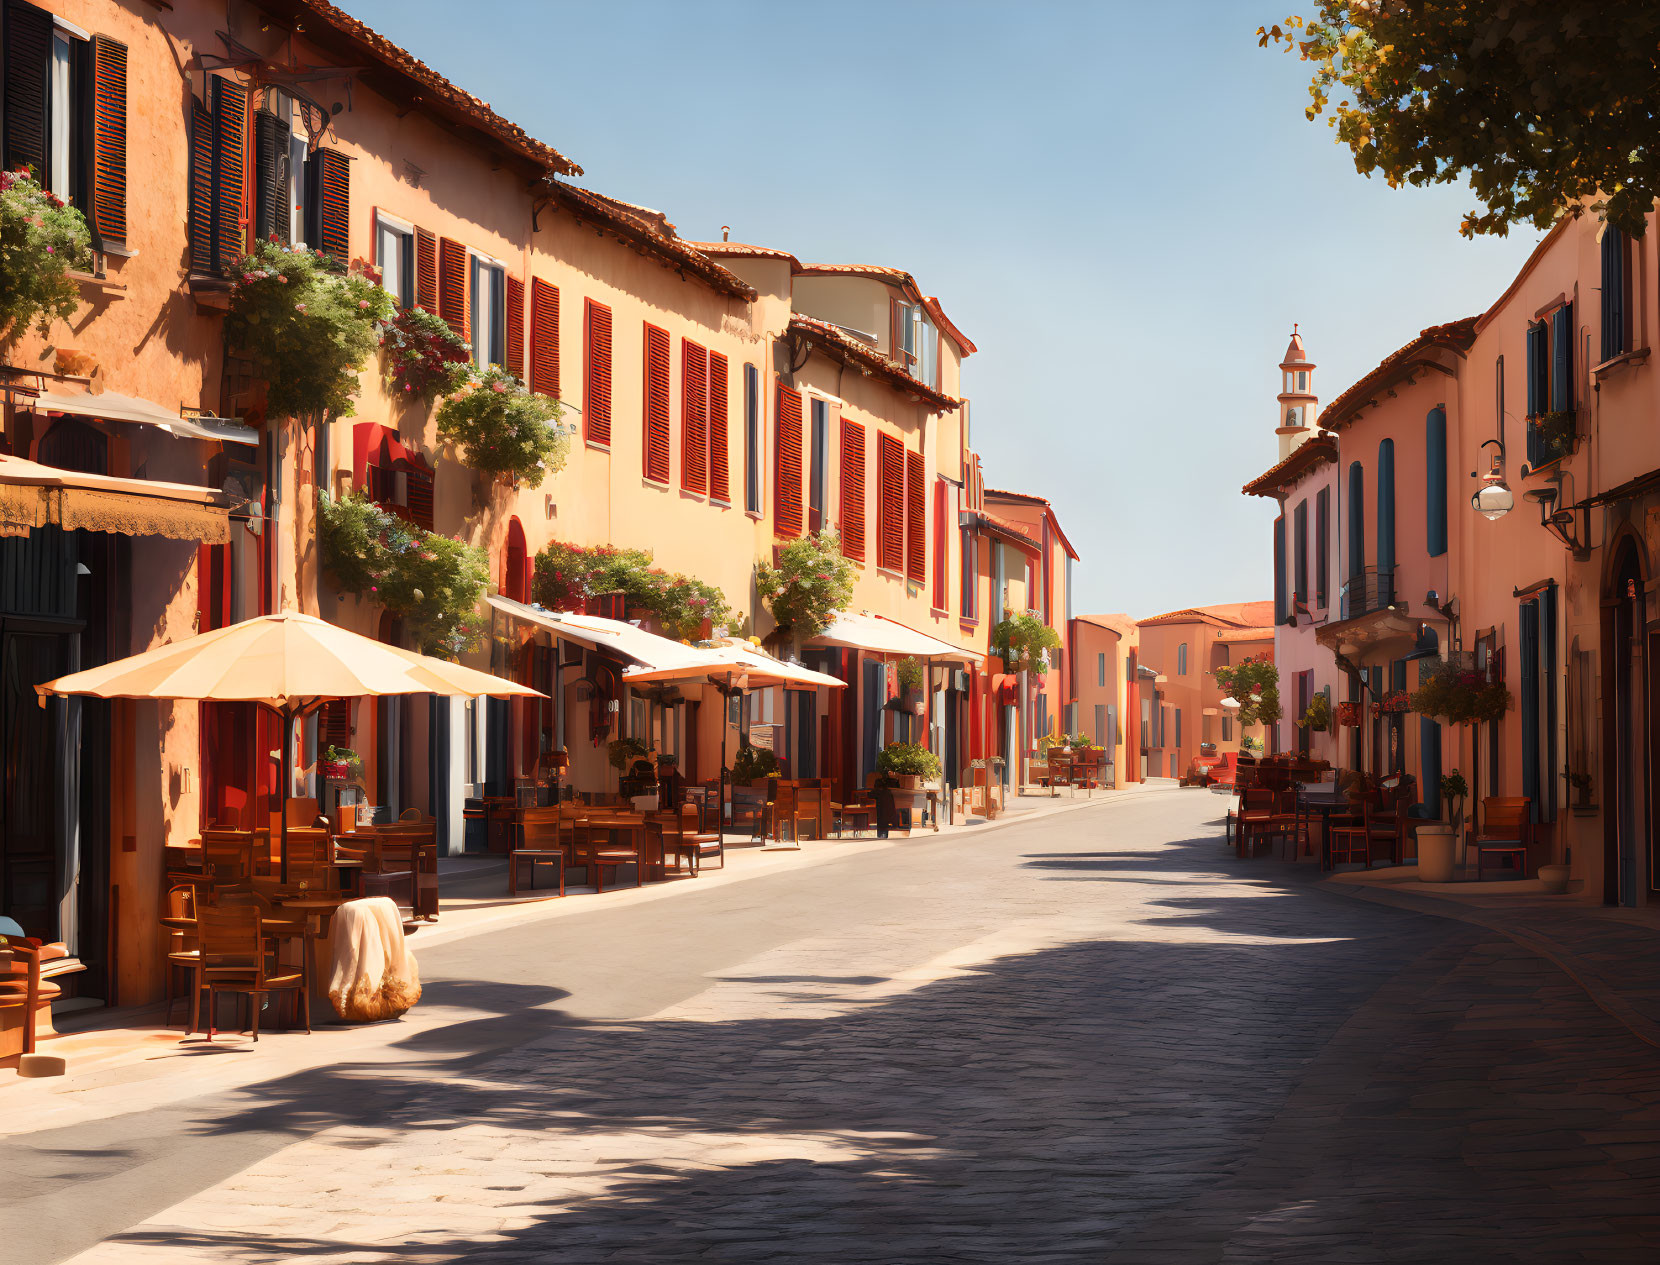 Charming European street with colorful buildings and outdoor cafes